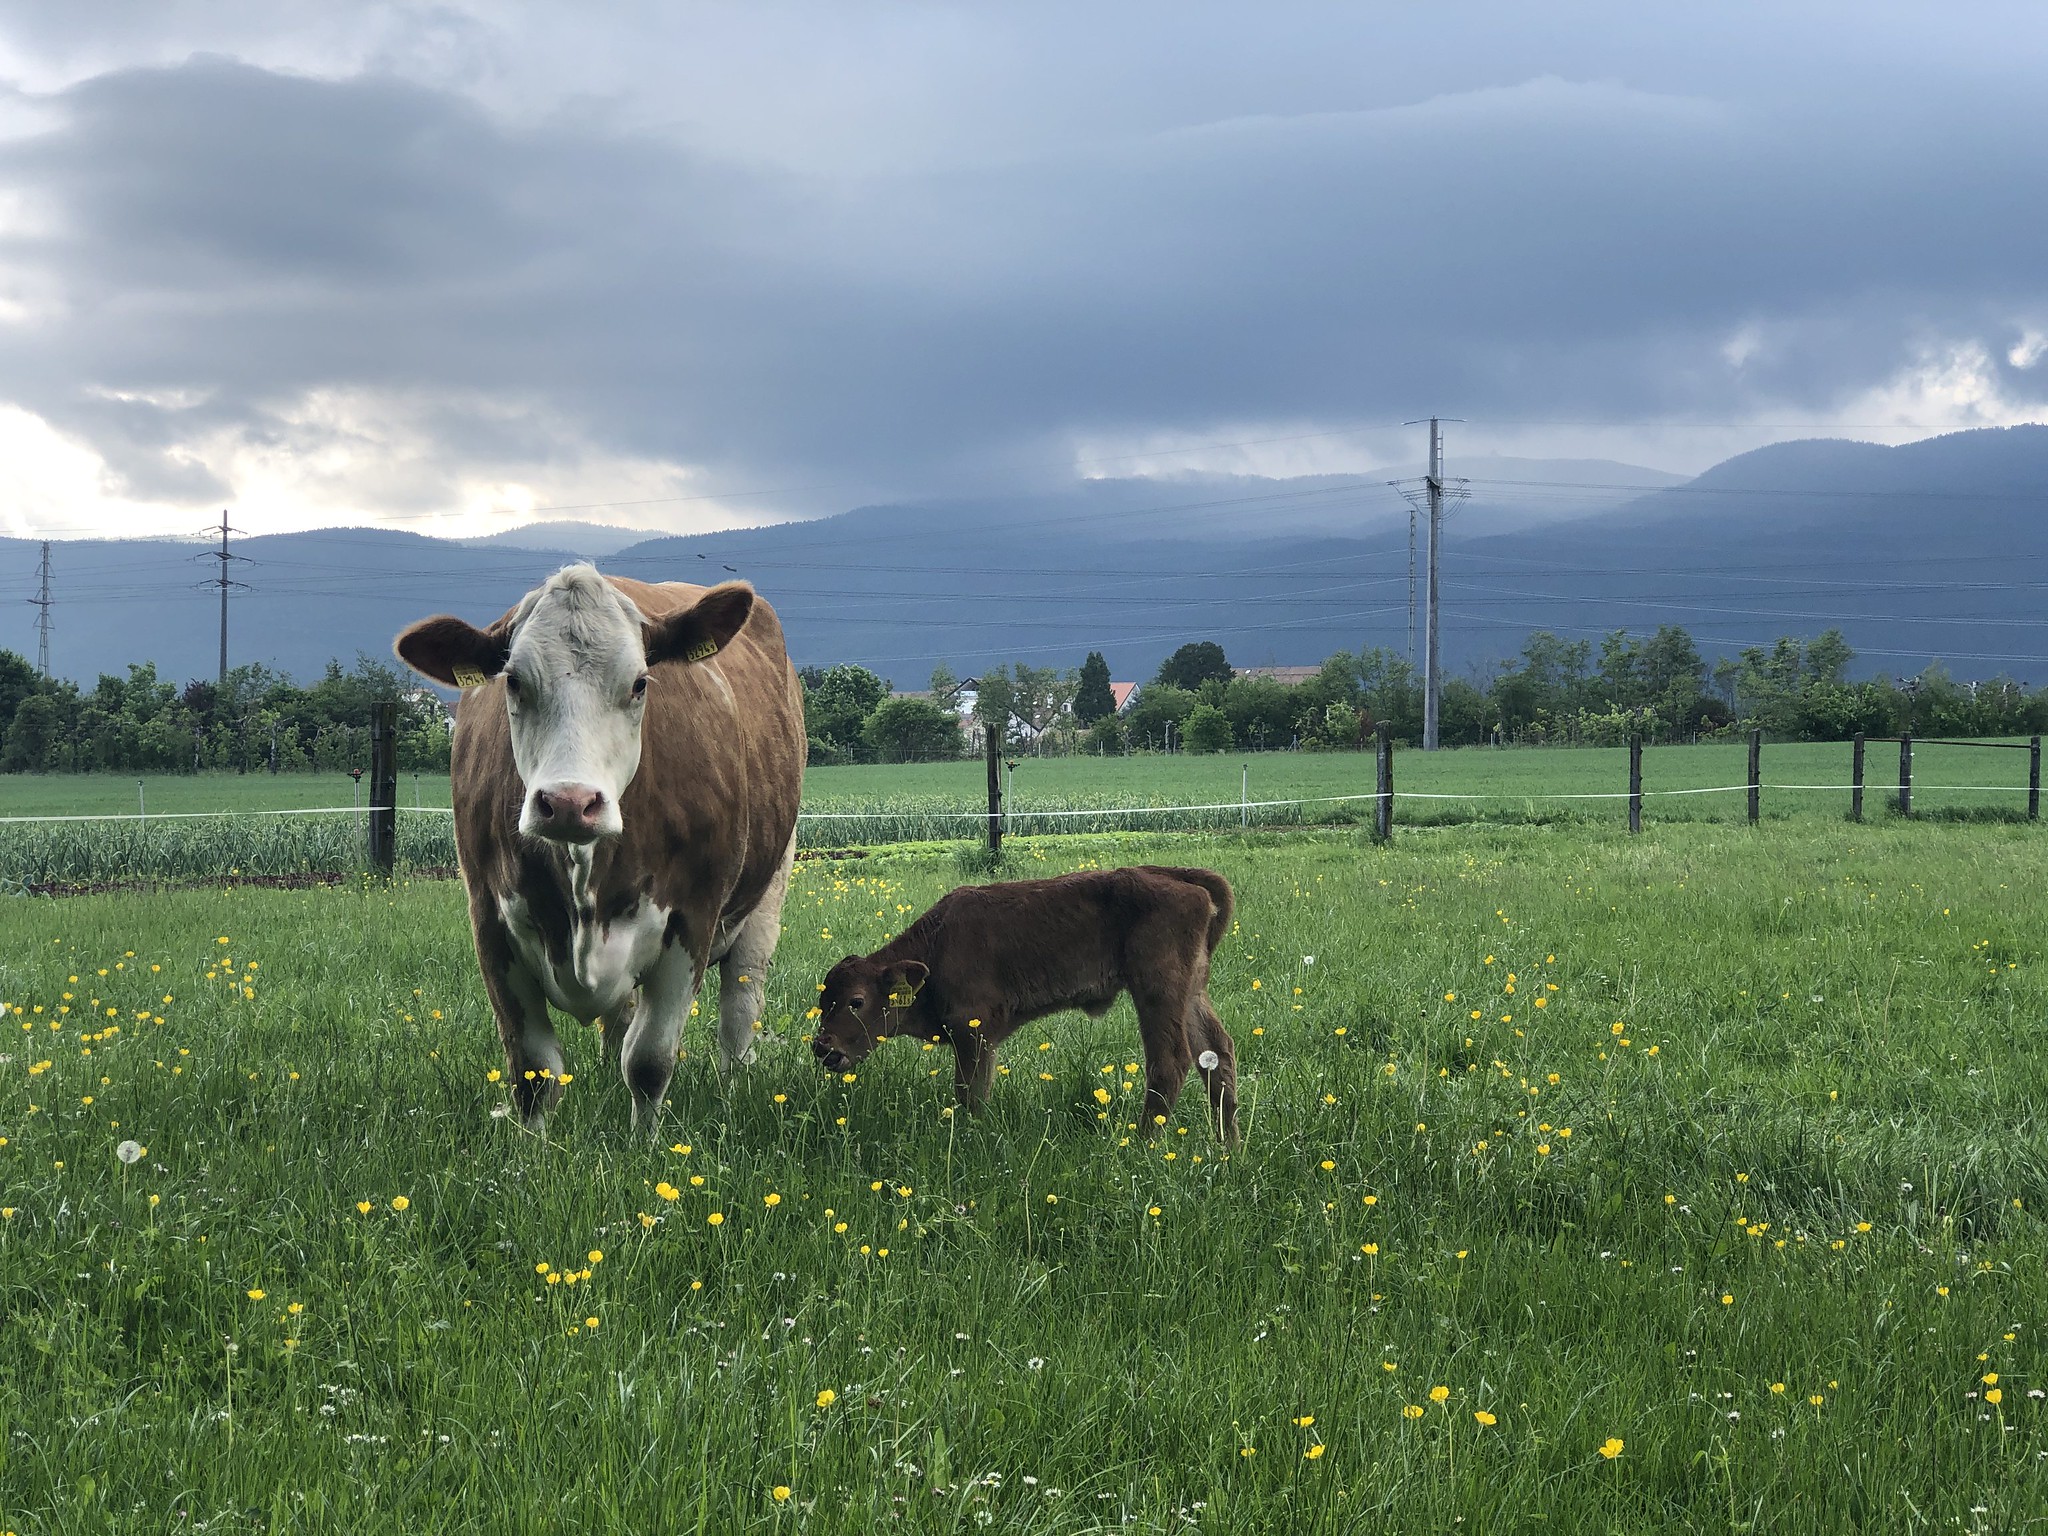 Day 52 Of Self-Isolation in Switzerland – More Cows, and Cascading Style Sheets